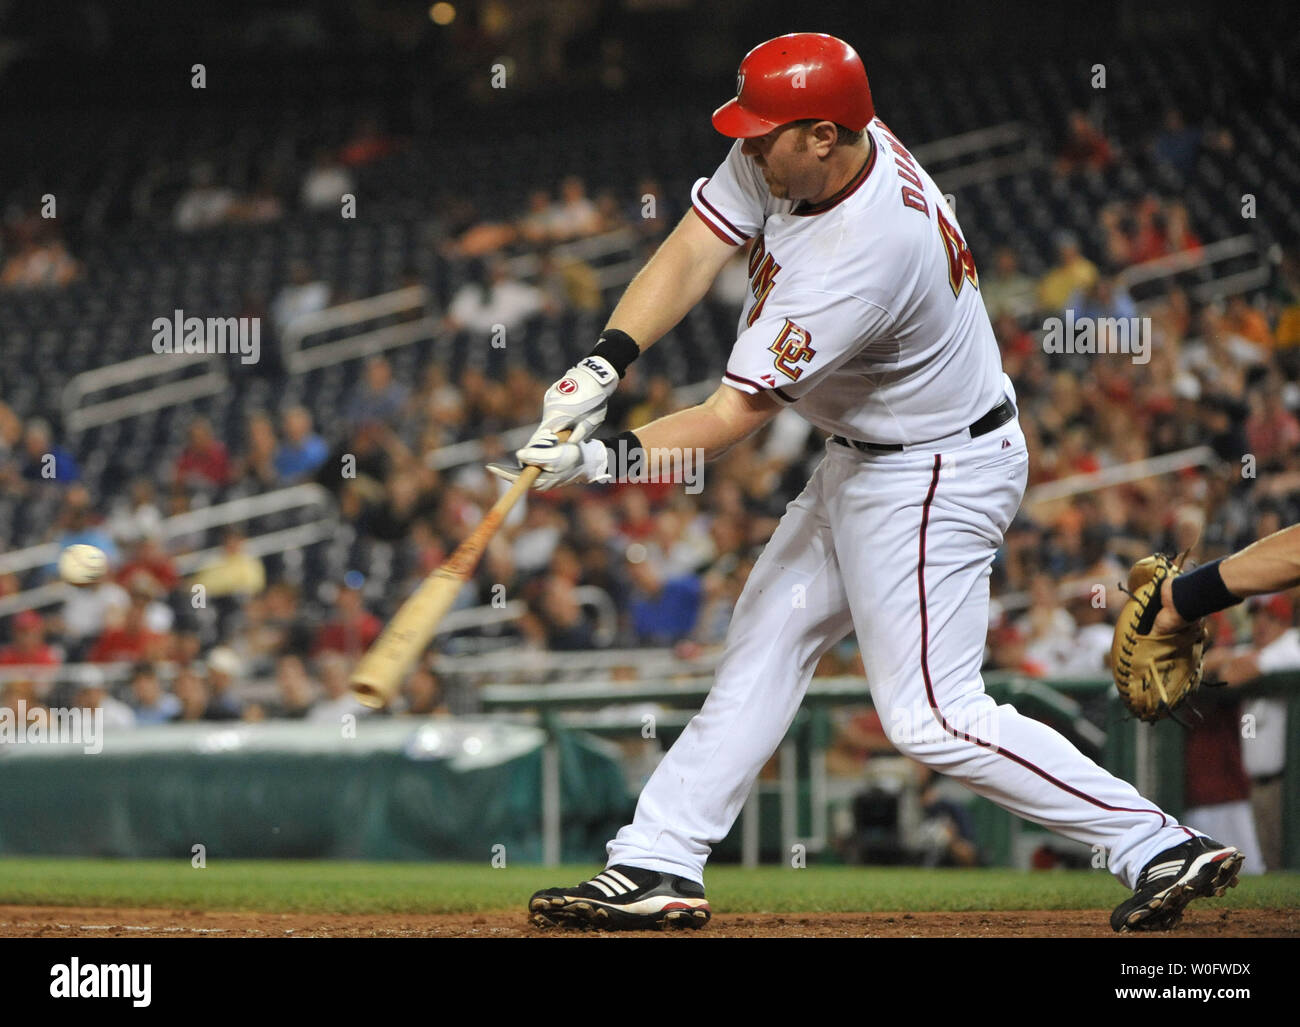 Adam dunn Black and White Stock Photos & Images - Alamy